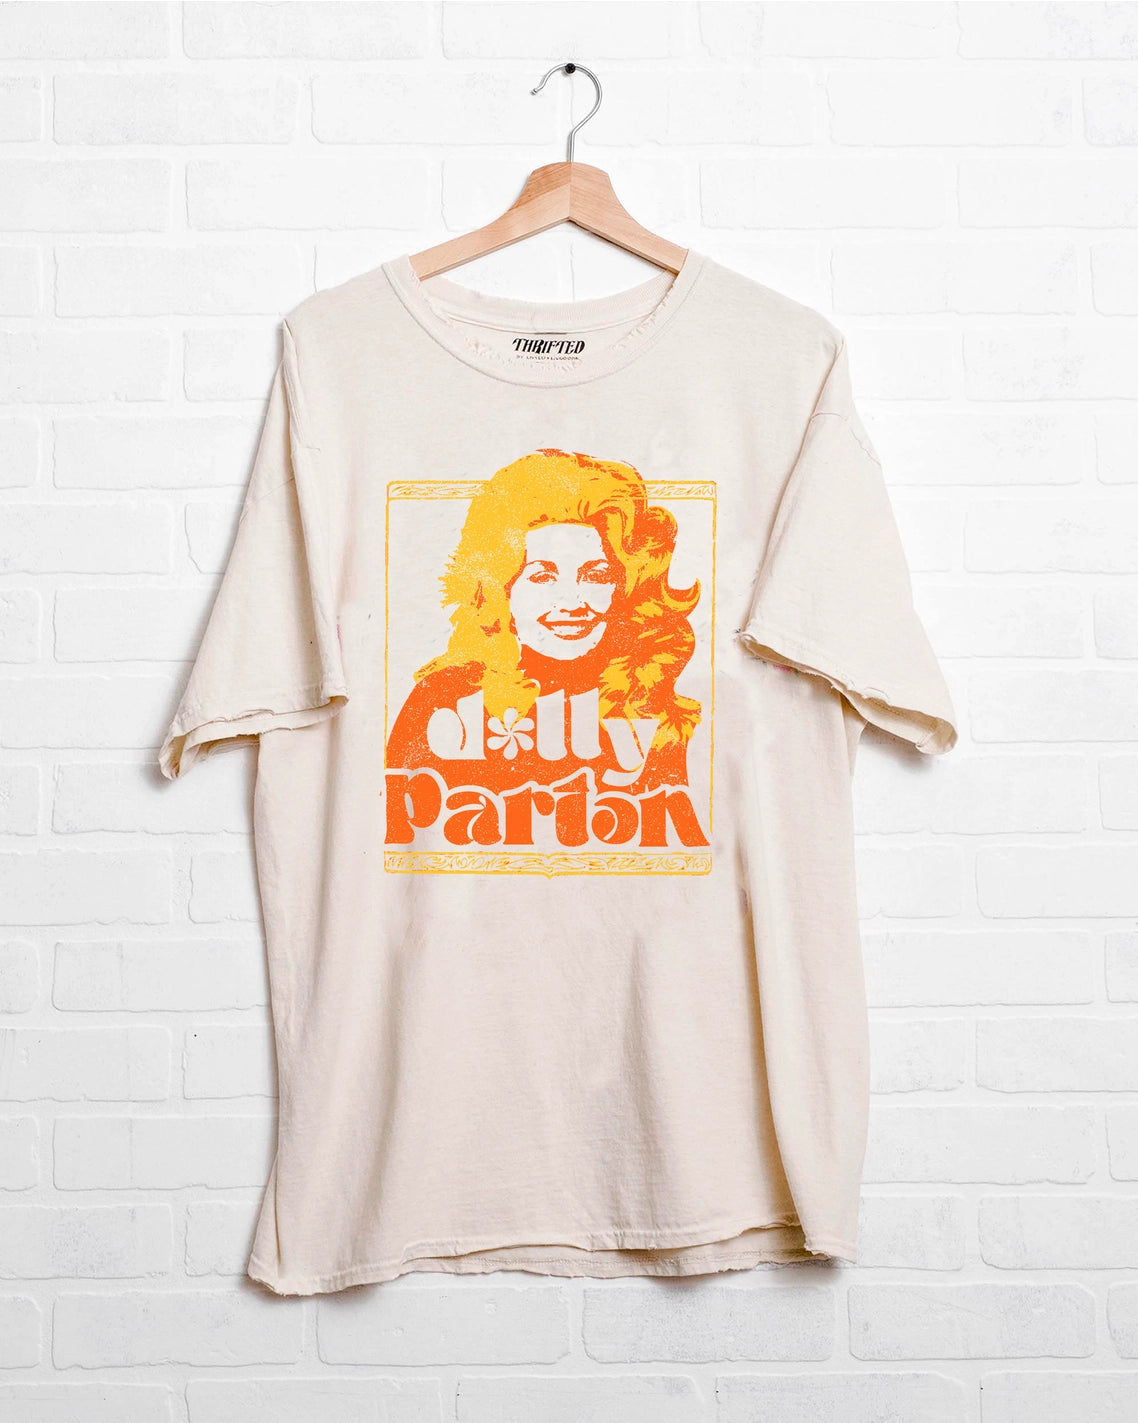 dolly parton golden graphic t-shirt in white